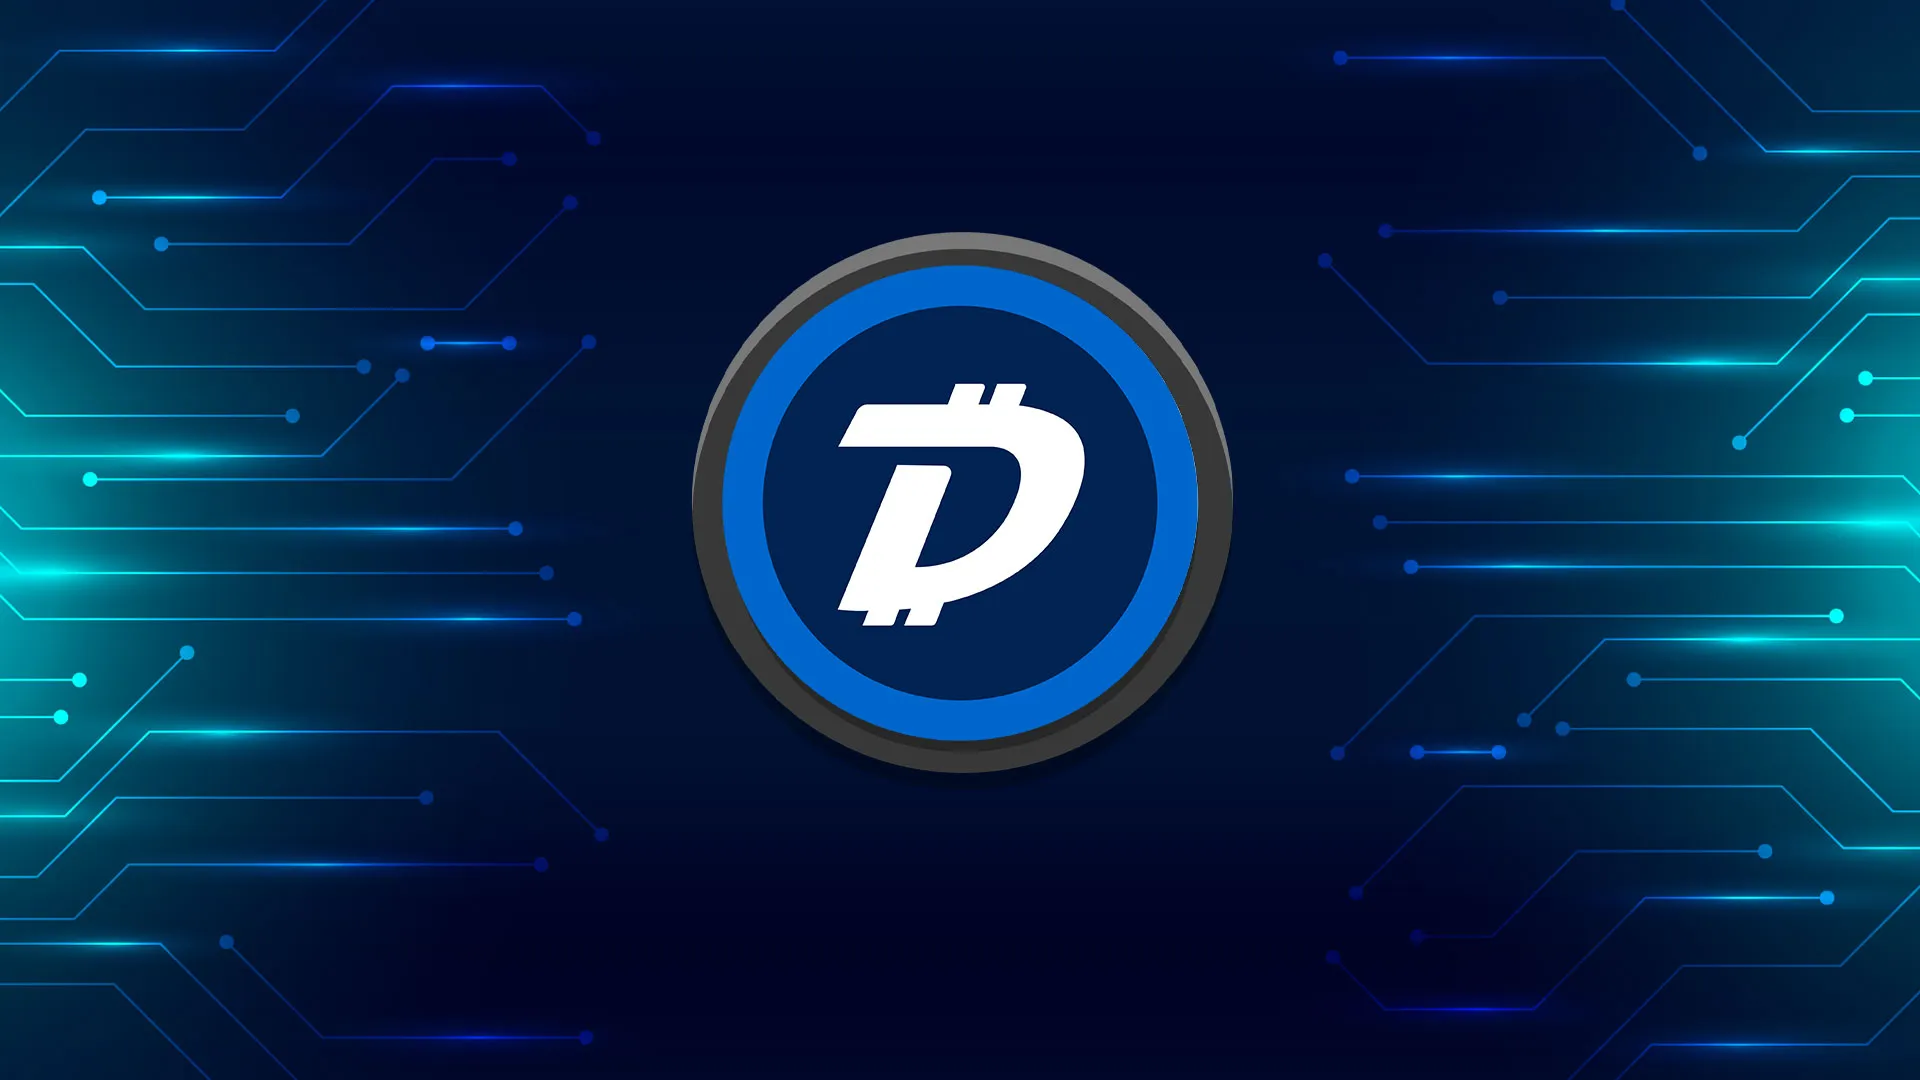 How DigiByte is Different from Bitcoin and Other Cryptocurrencies